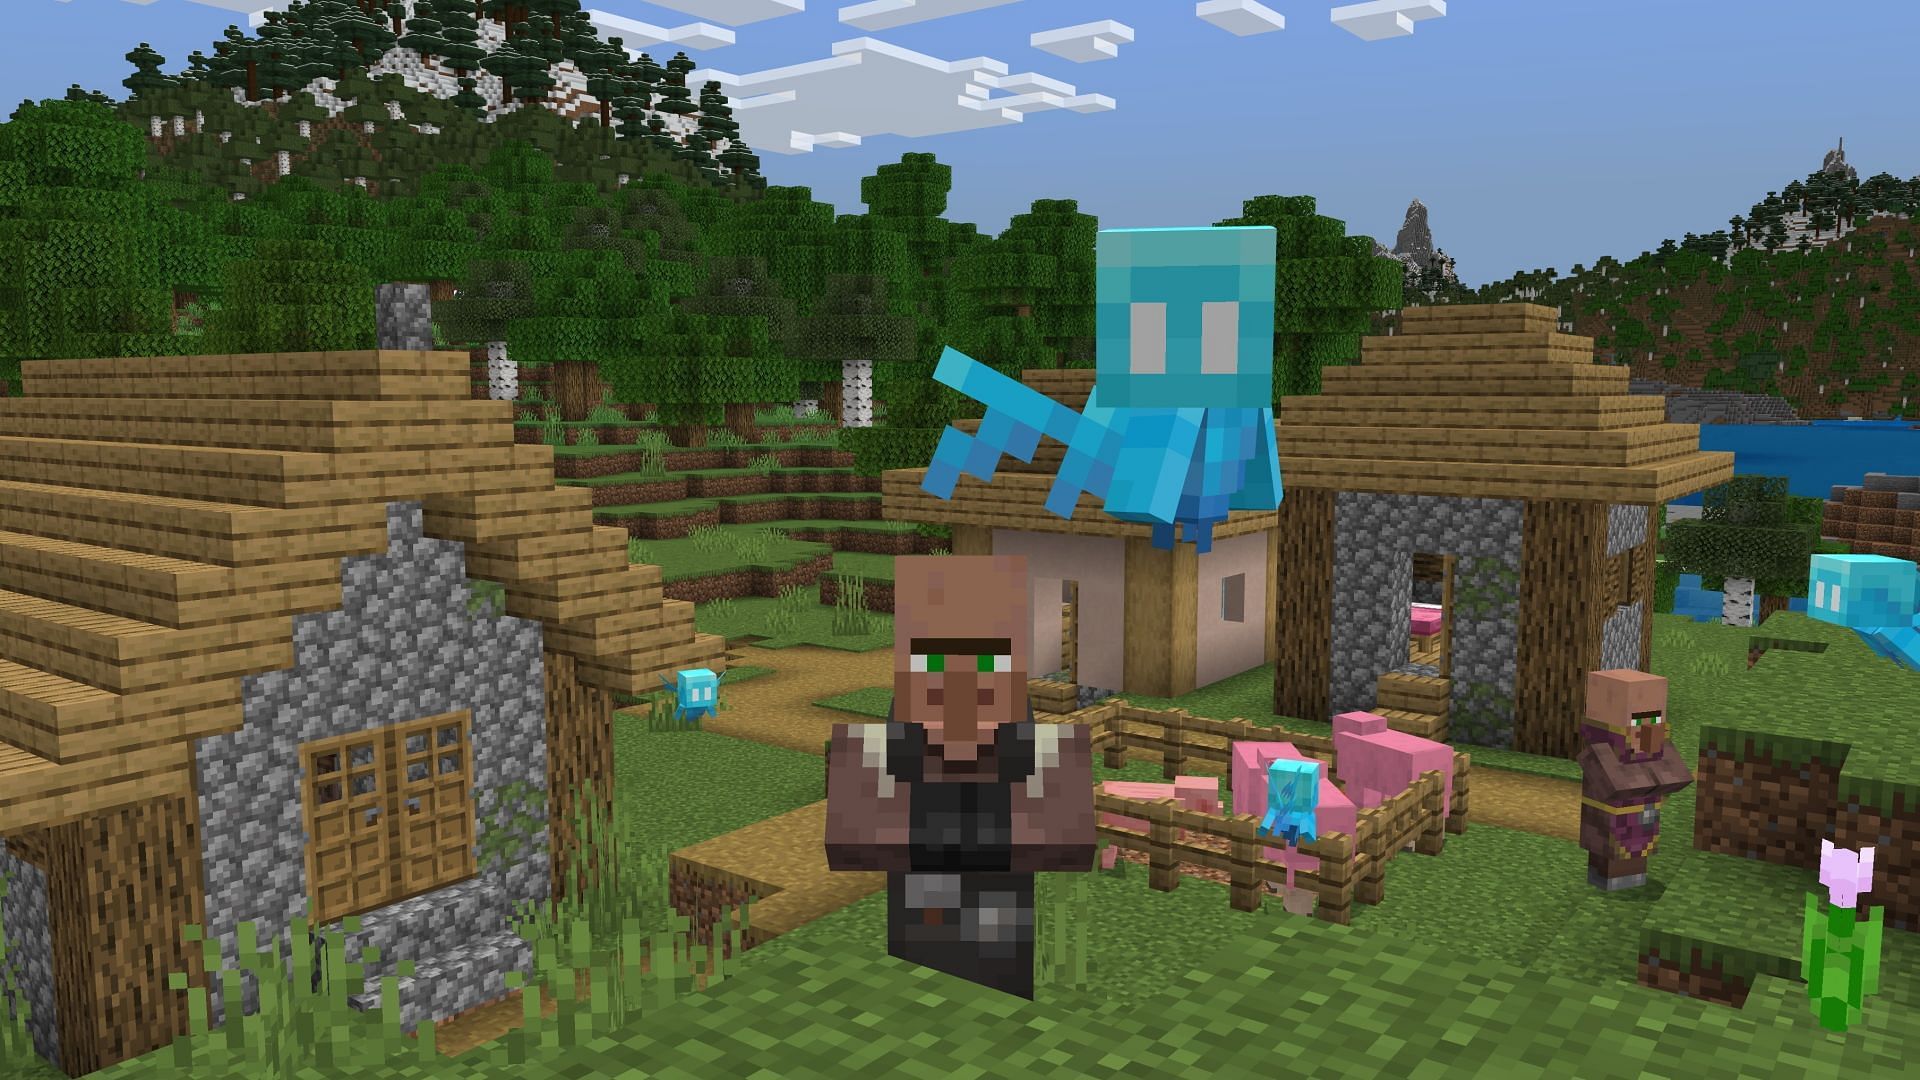 A villager and an allay in Minecraft Bedrock Edition